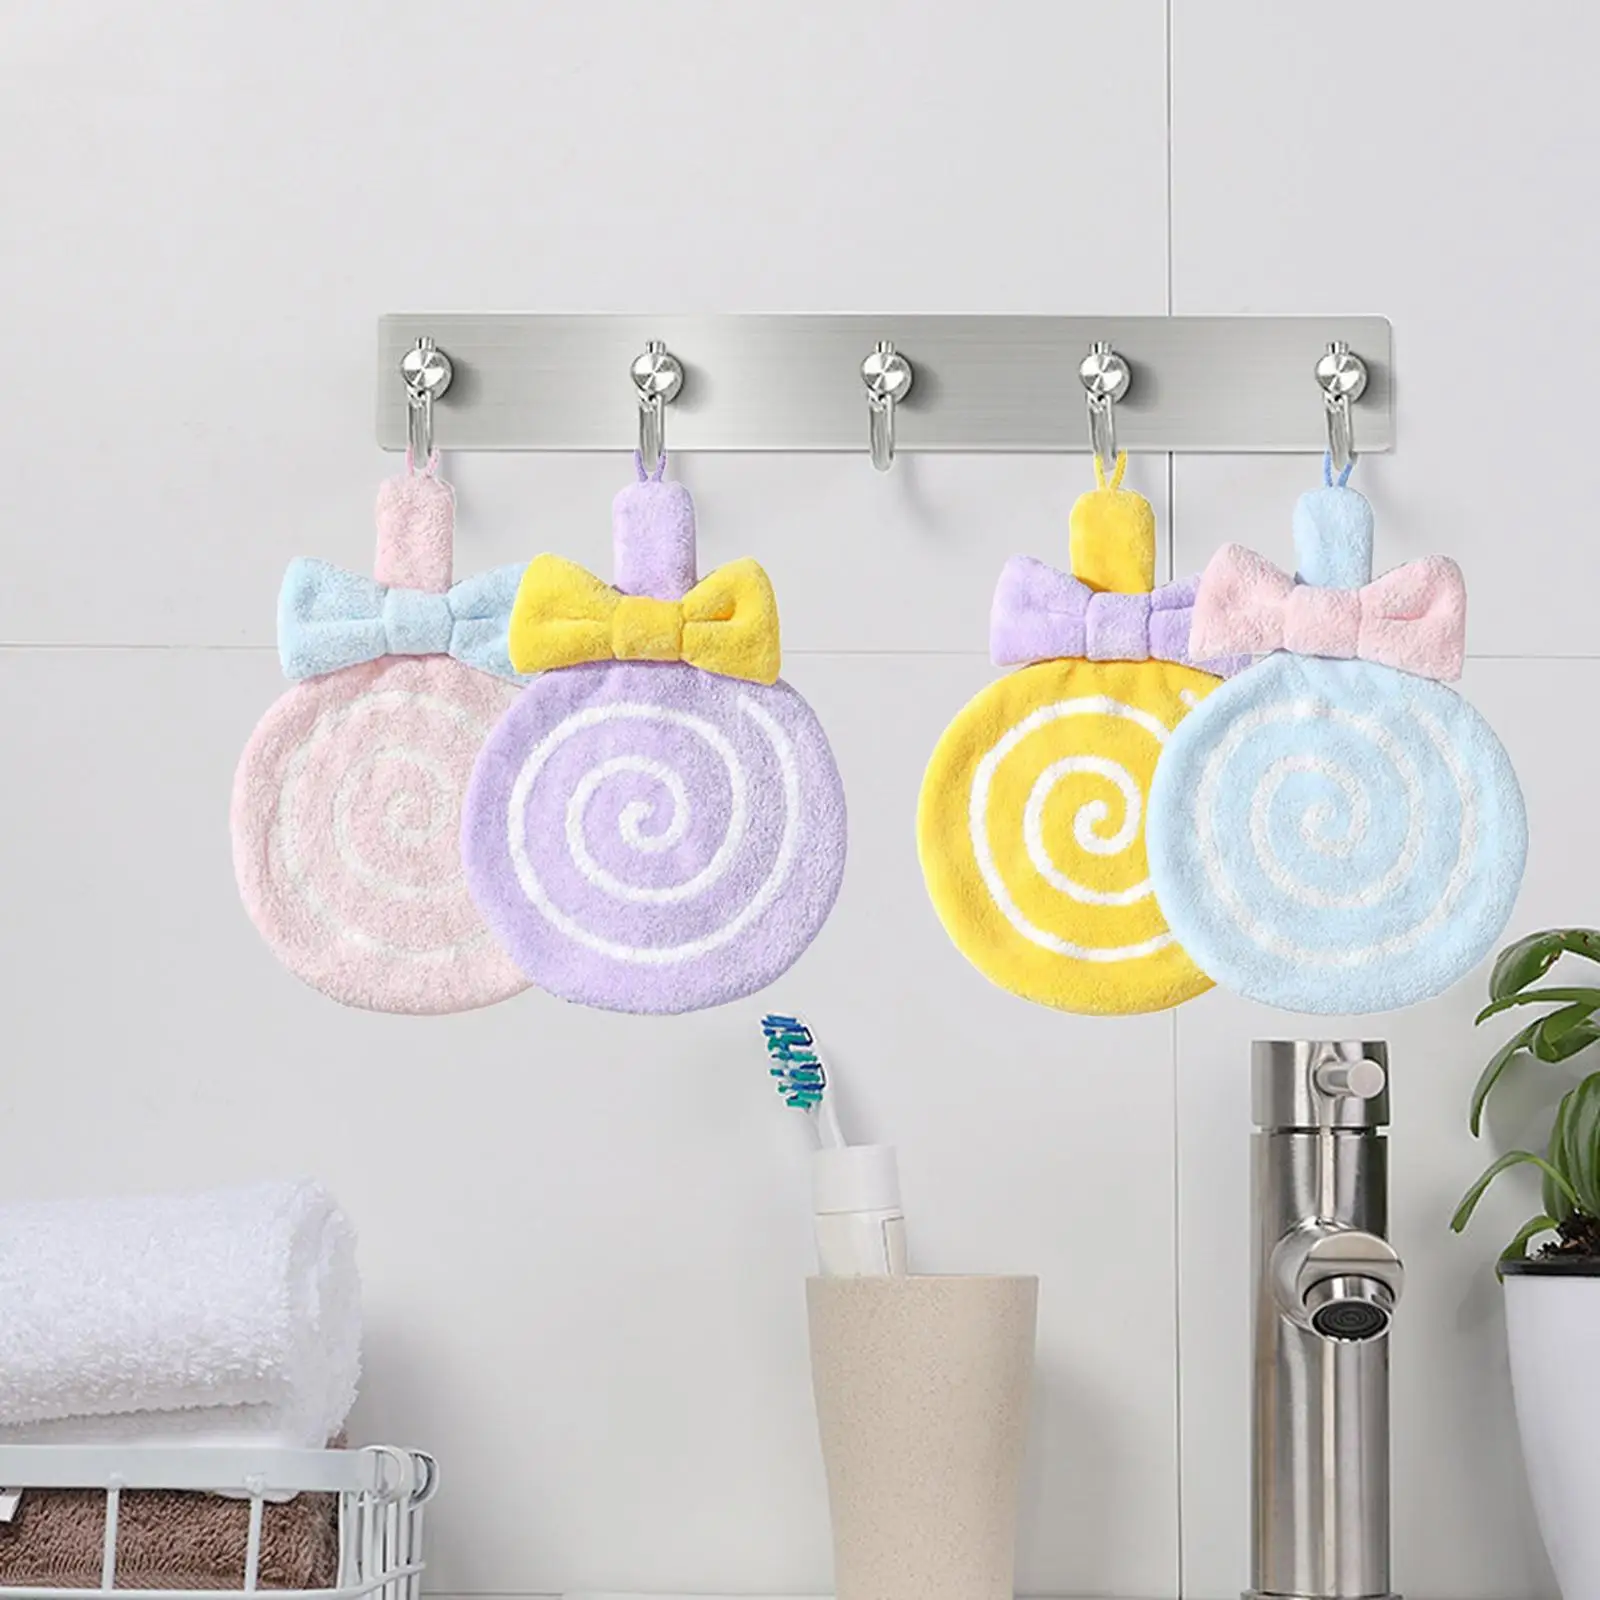 4x Hanging Hand Towels Reusable Dishtowels Thick Toddlers Hanging Hand Towels for Cleaning Toilet Bathroom Kitchen Drying Hands